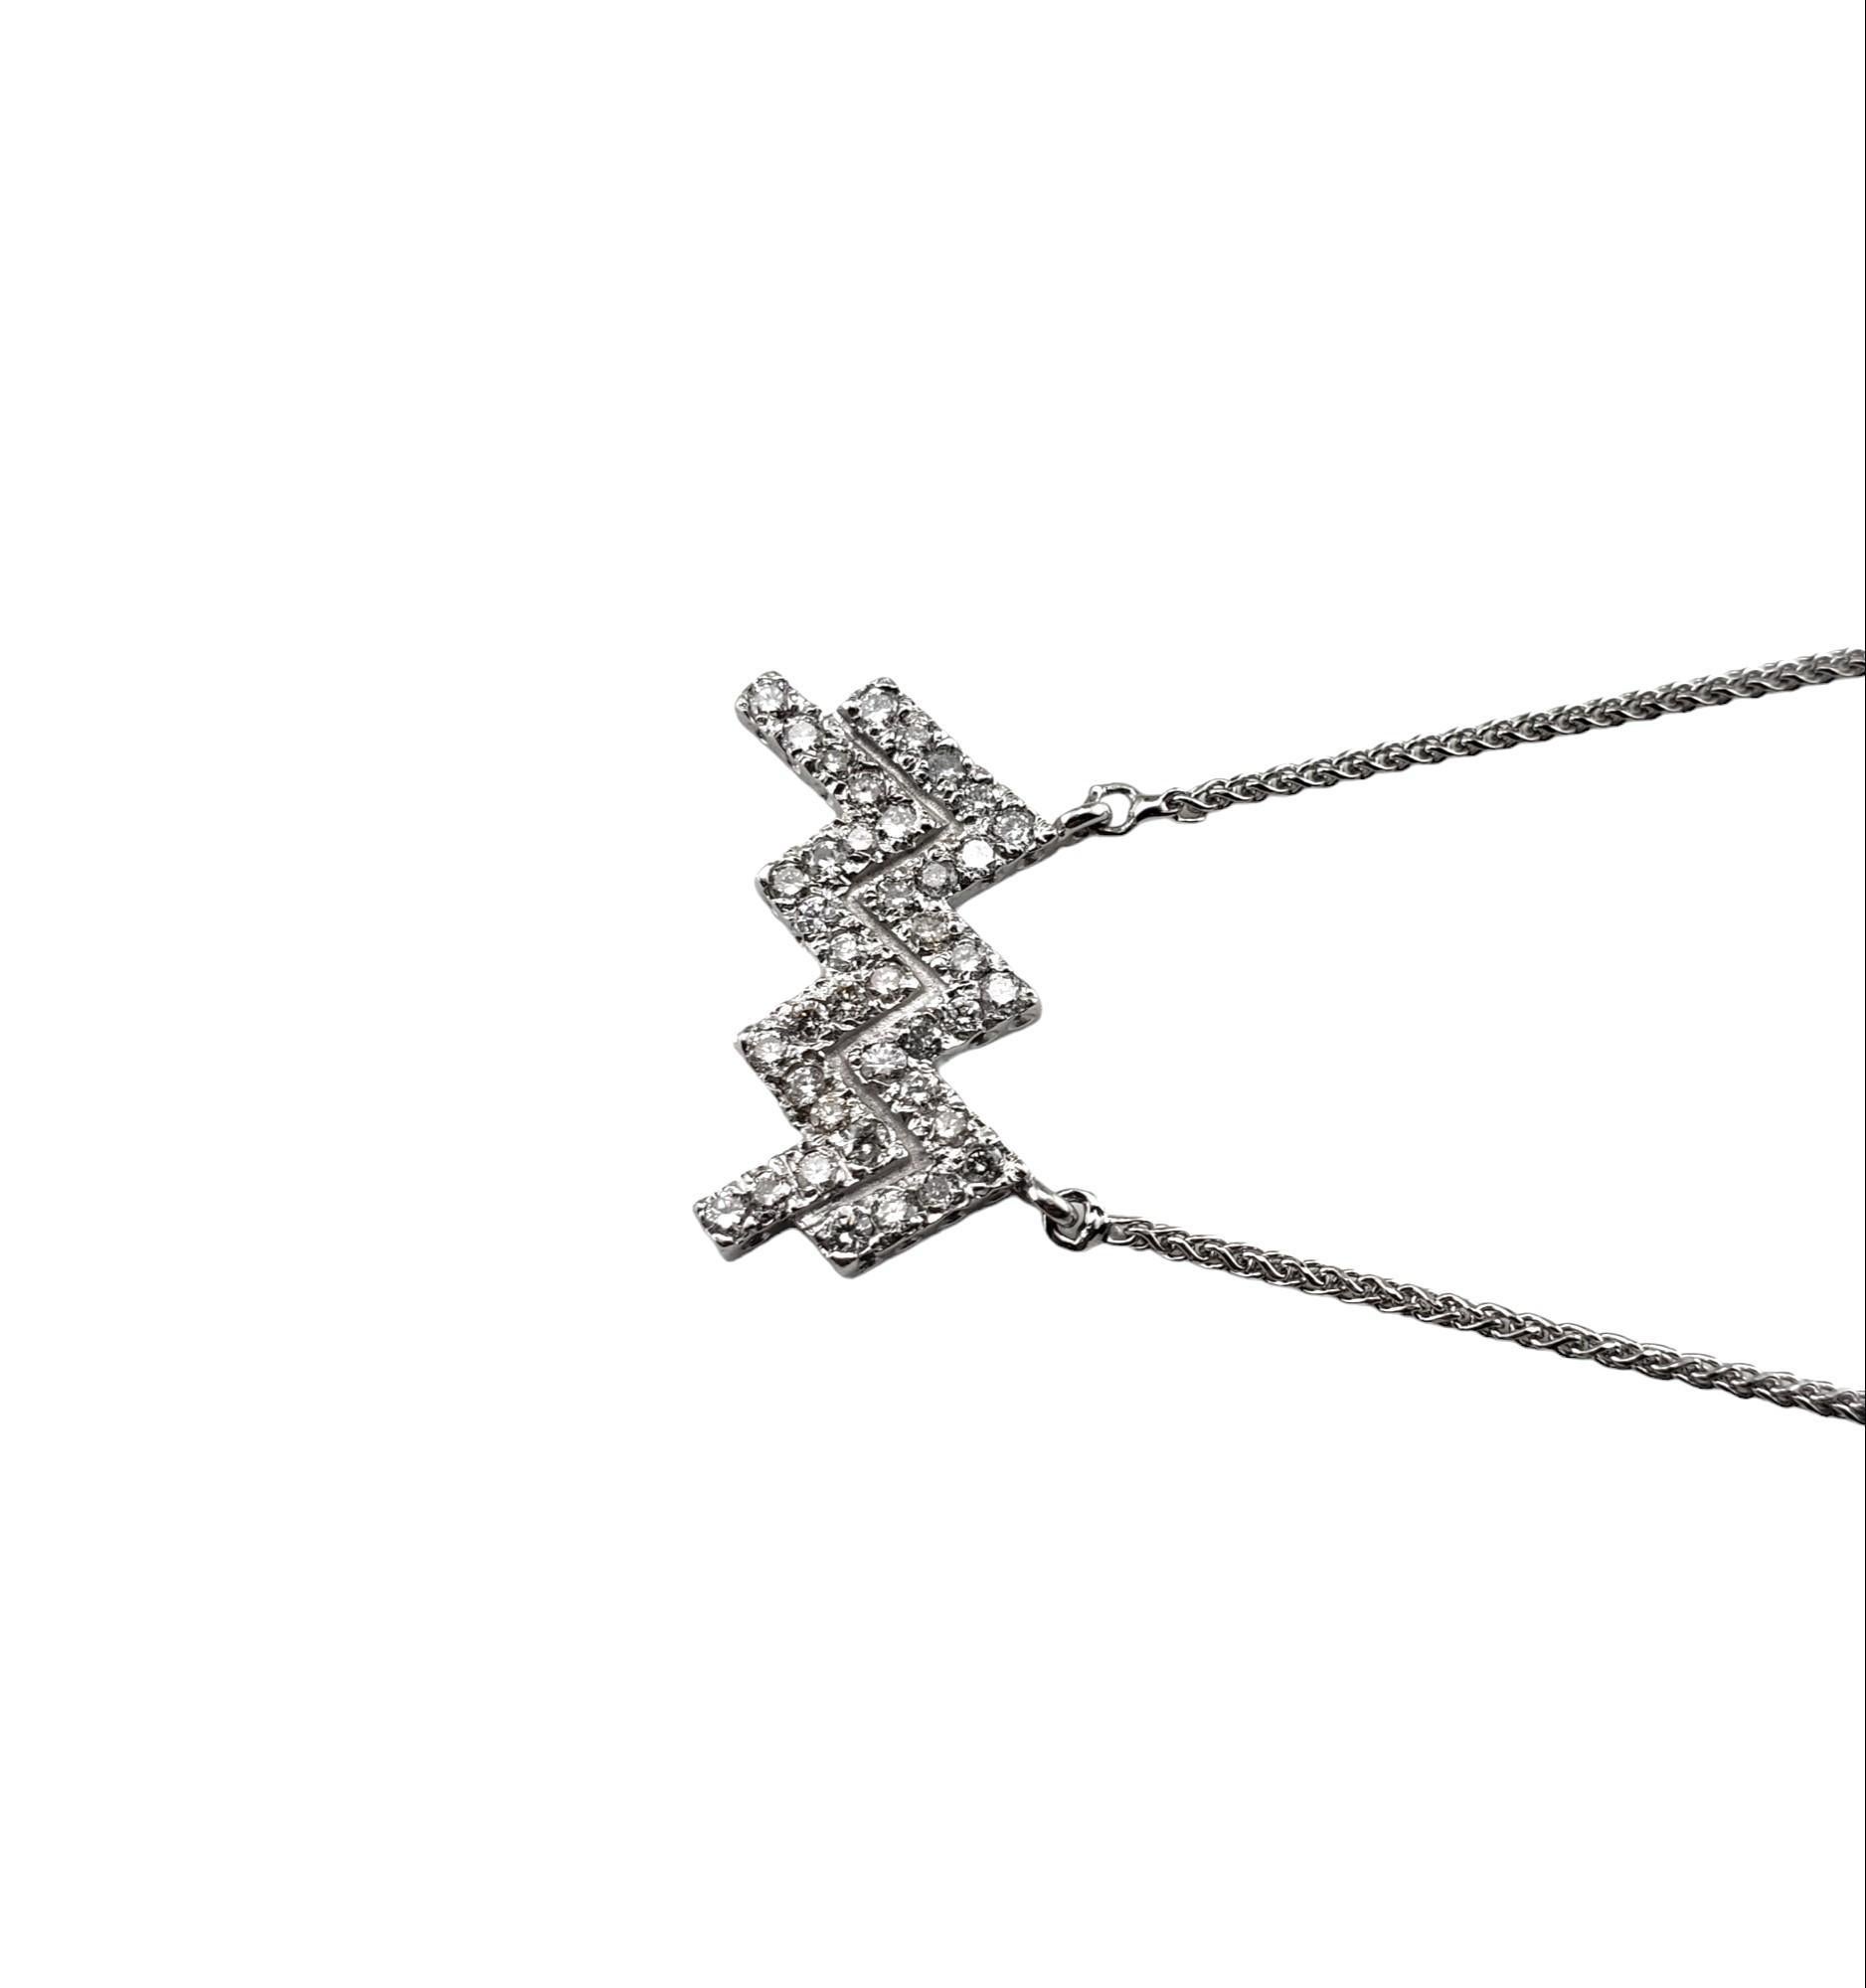 Vintage 14 Karat White Gold and Diamond Aquarius Pendant Necklace-

This sparkling Aquarius pendant features 40 round brilliant cut diamonds set in classic 14K white gold.  Suspends from a classic cable necklace.

Approximate total diamond weight: 